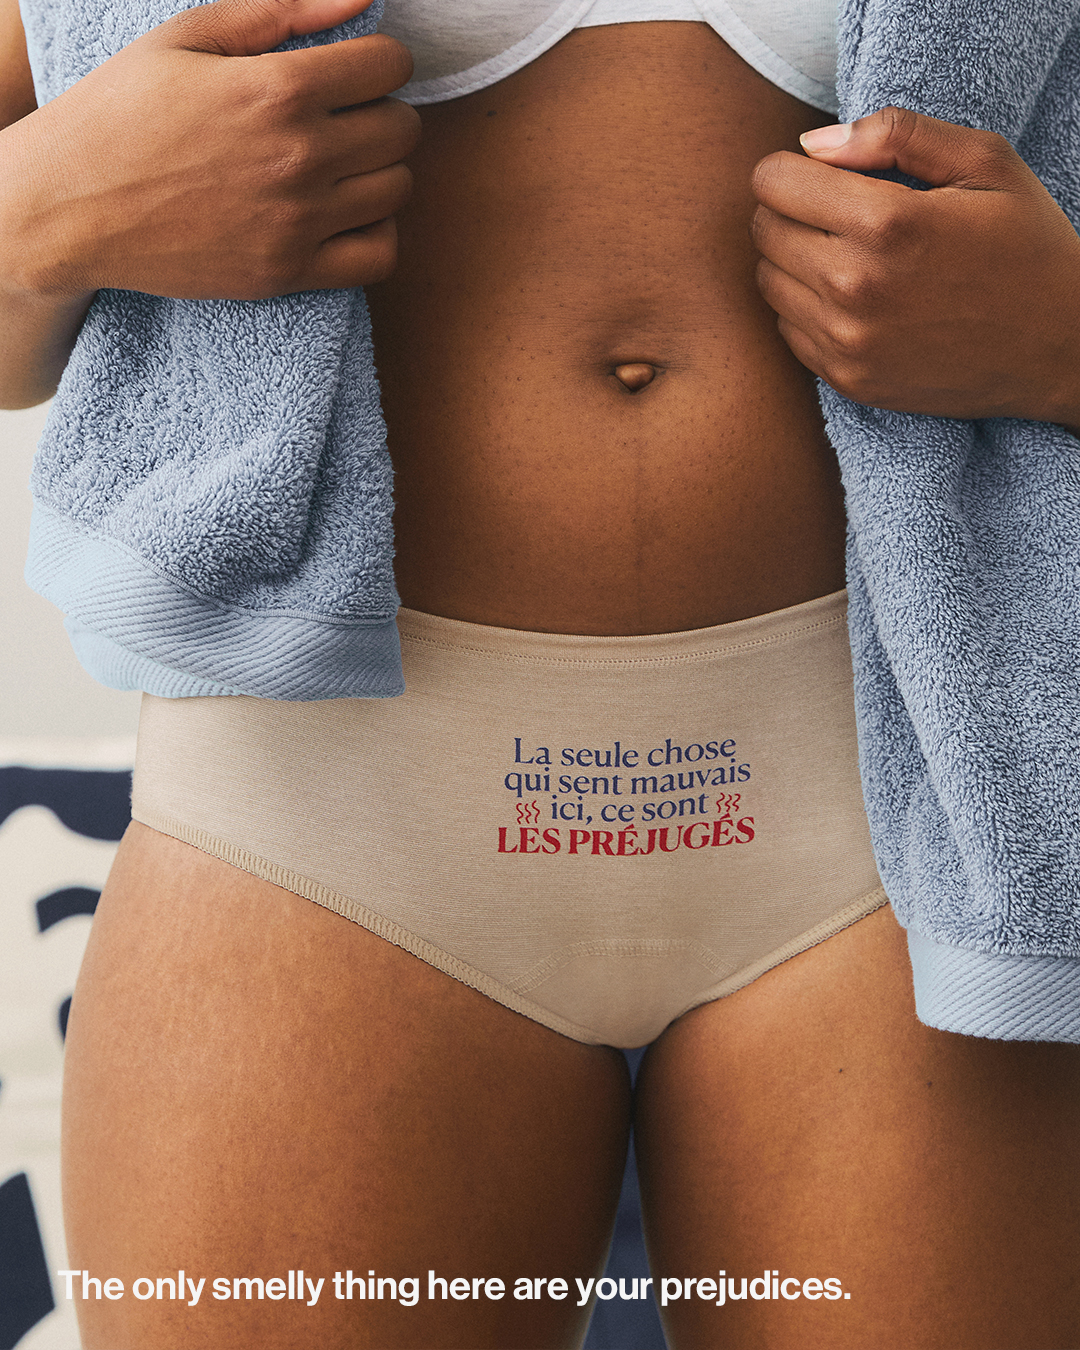 French Feminine Hygiene Brand Launches a Collection of Underwear That  Tackles Prejudices